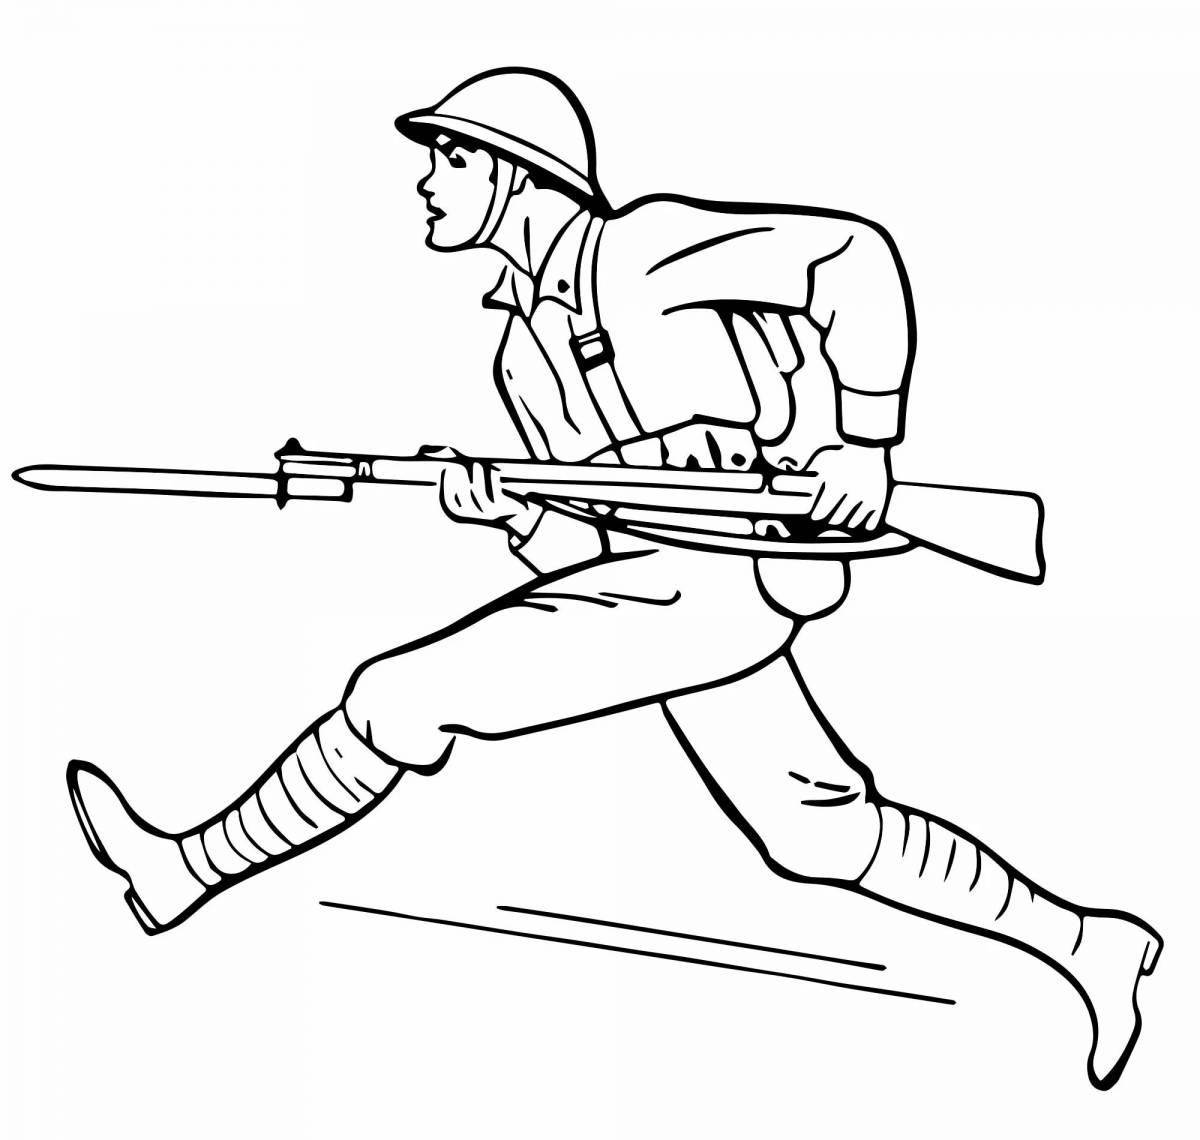 Coloring book brave soldier and child